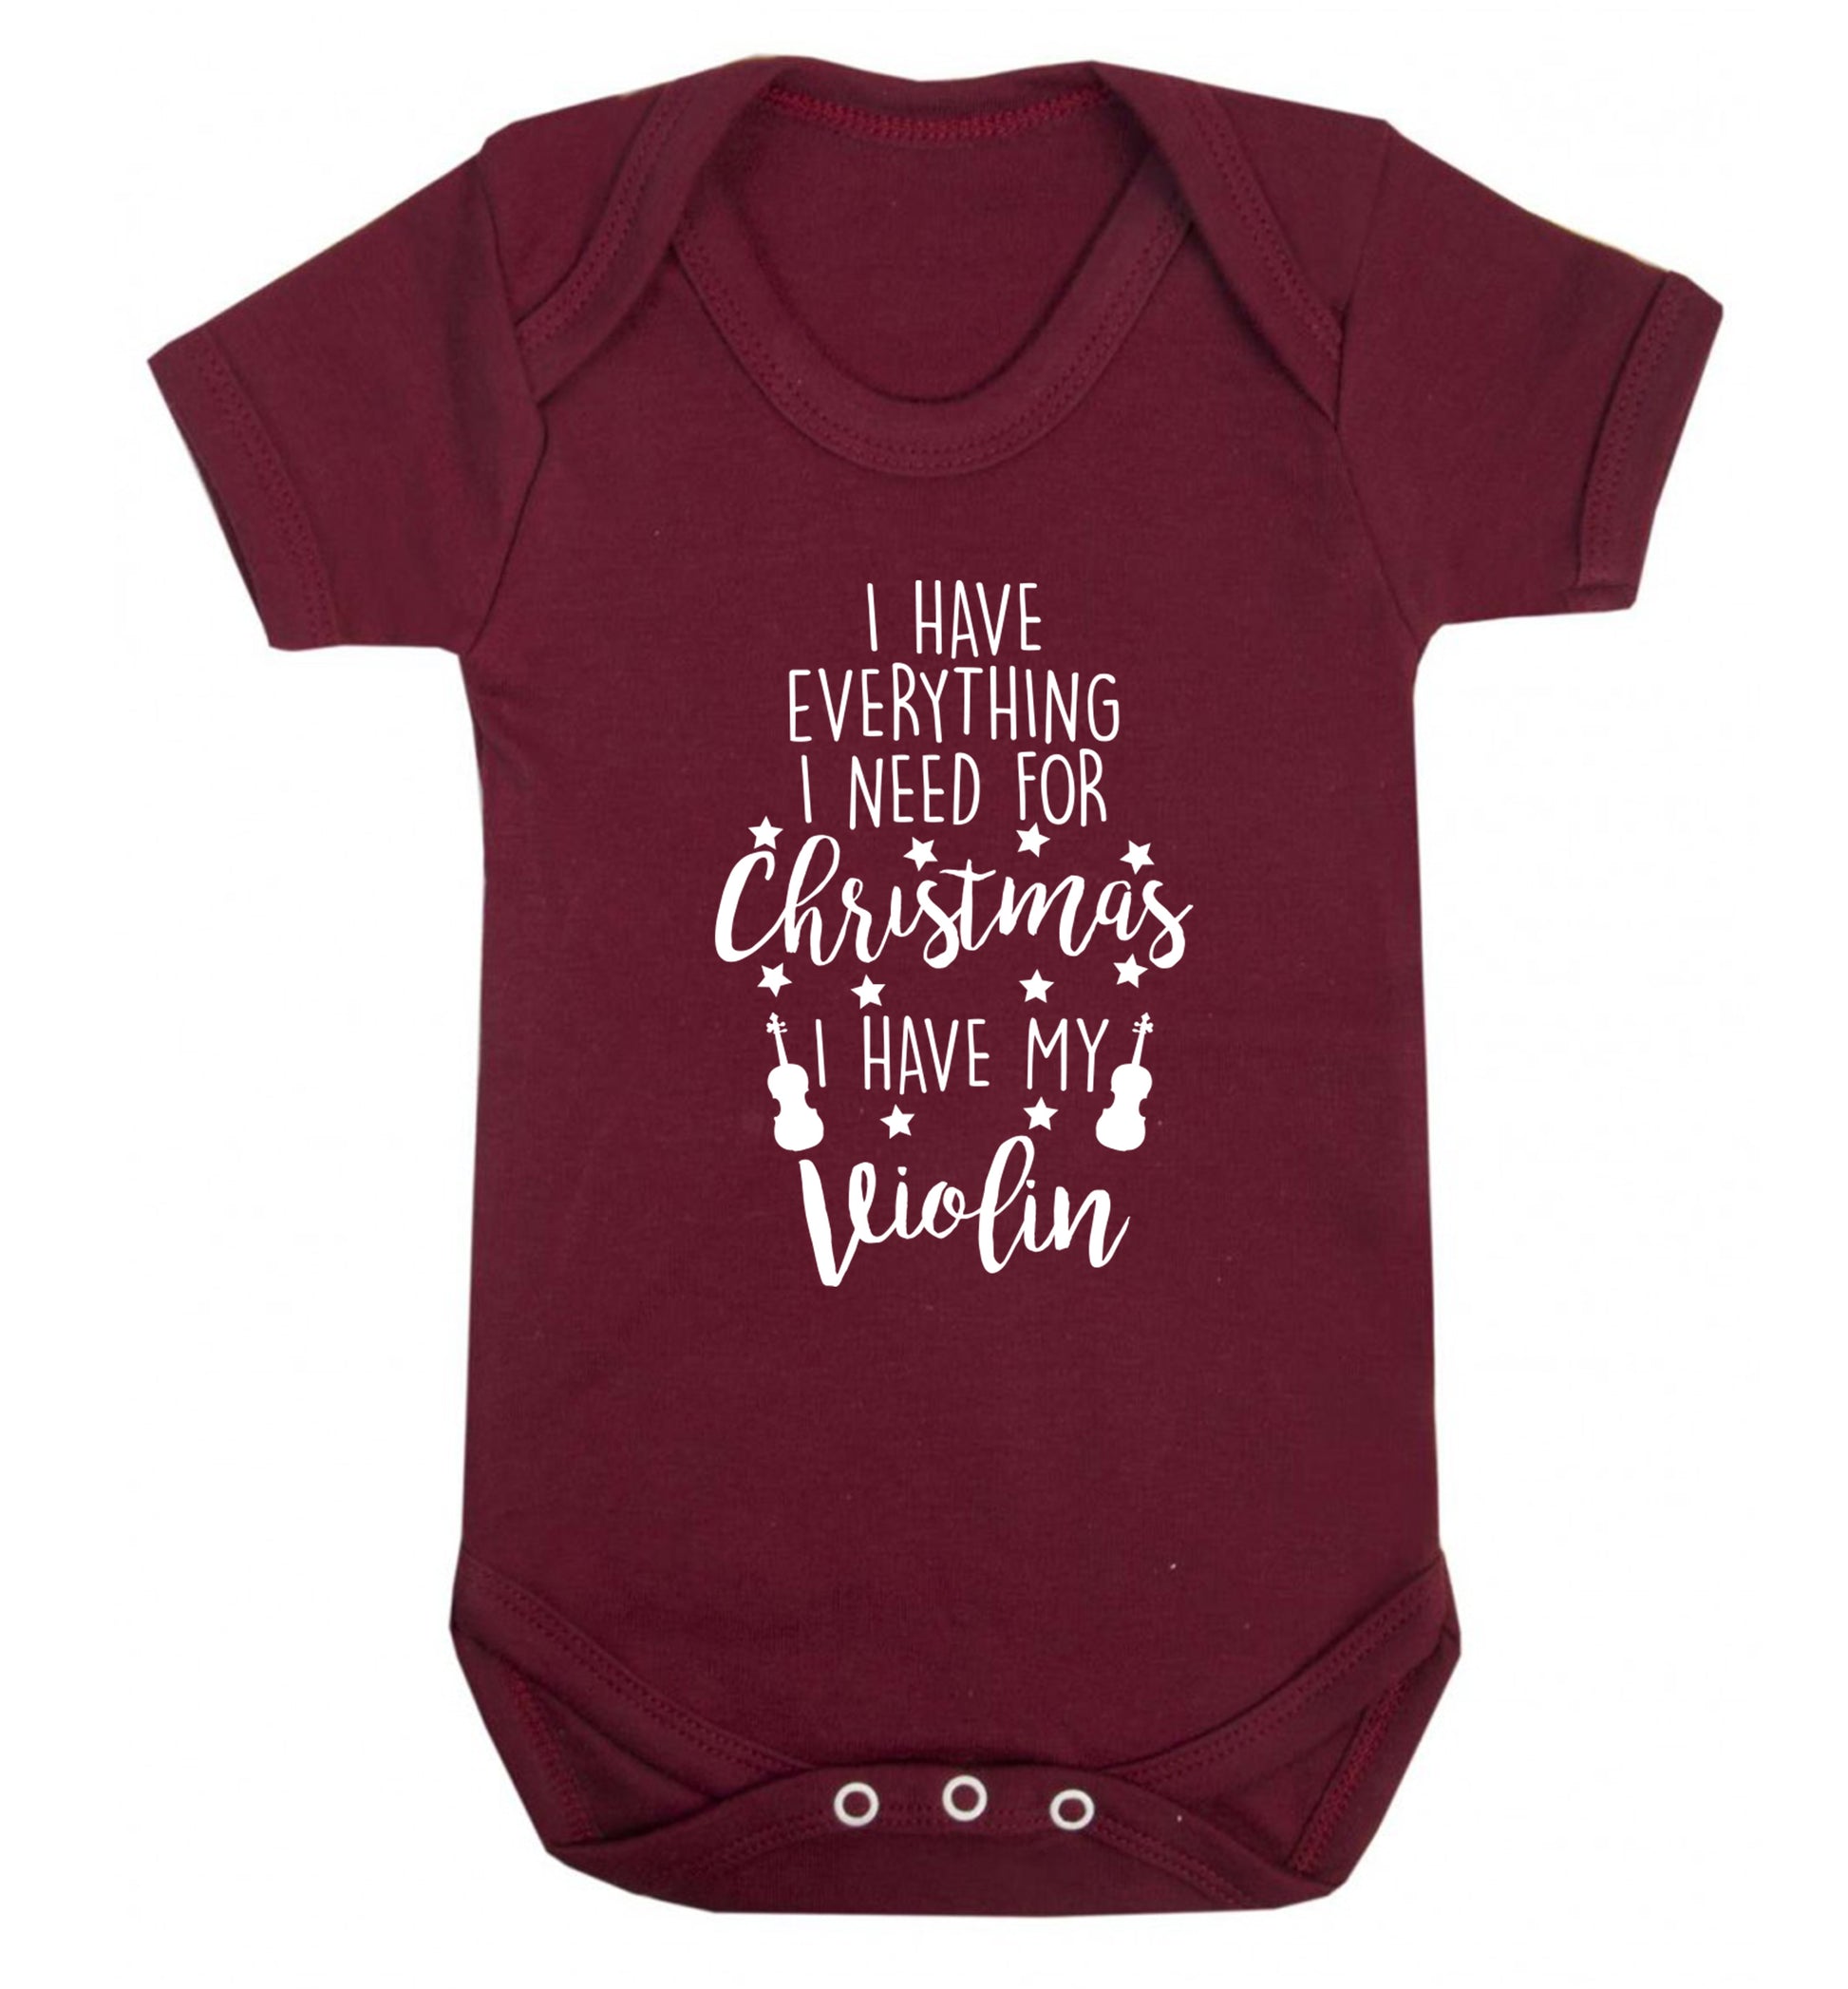 I have everything I need for Christmas I have my violin Baby Vest maroon 18-24 months